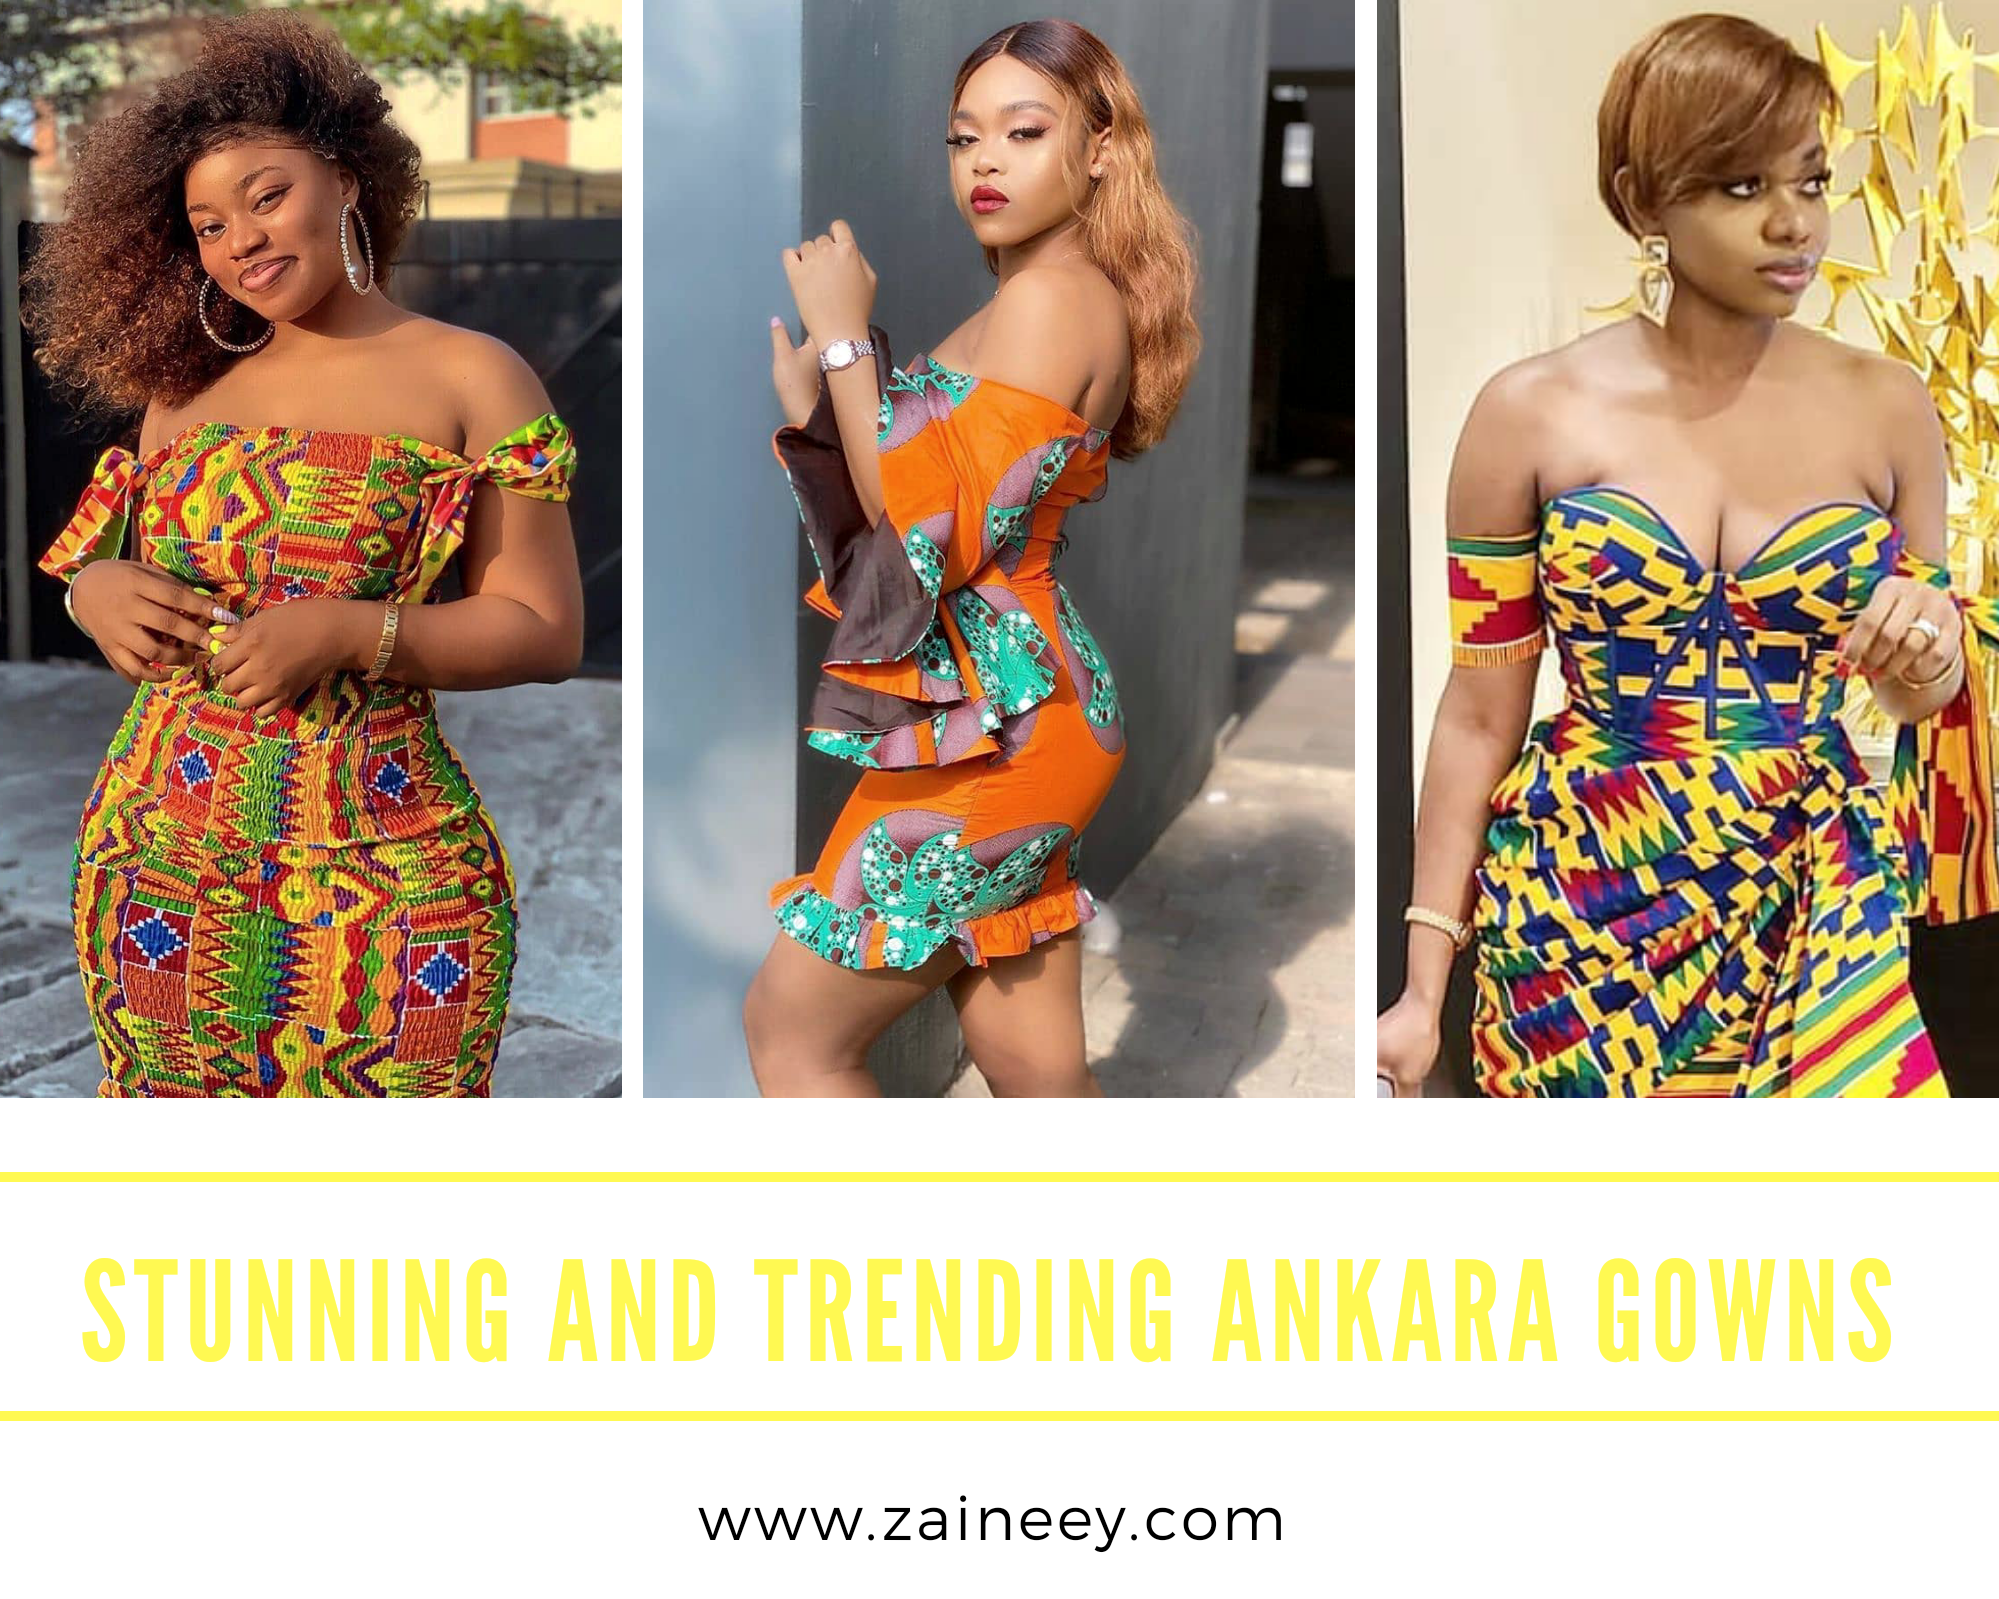 Ankara Gowns - Stunning and Trending Ankara Gowns for ladies who wants to stand out